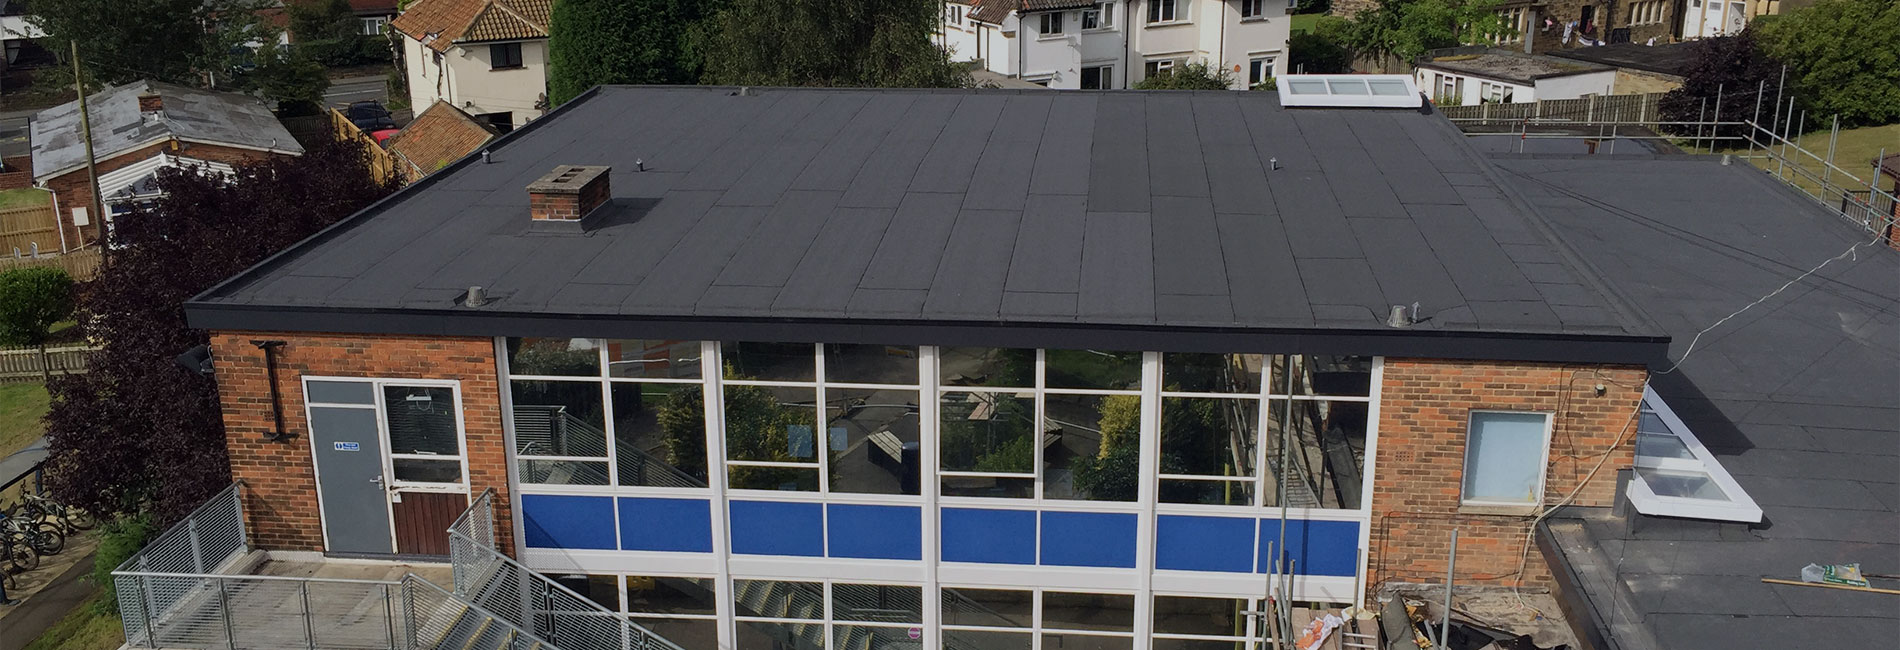 Specialists in all aspects of commercial and industrial flat roofing from a family company with over 50 years experience in the industry